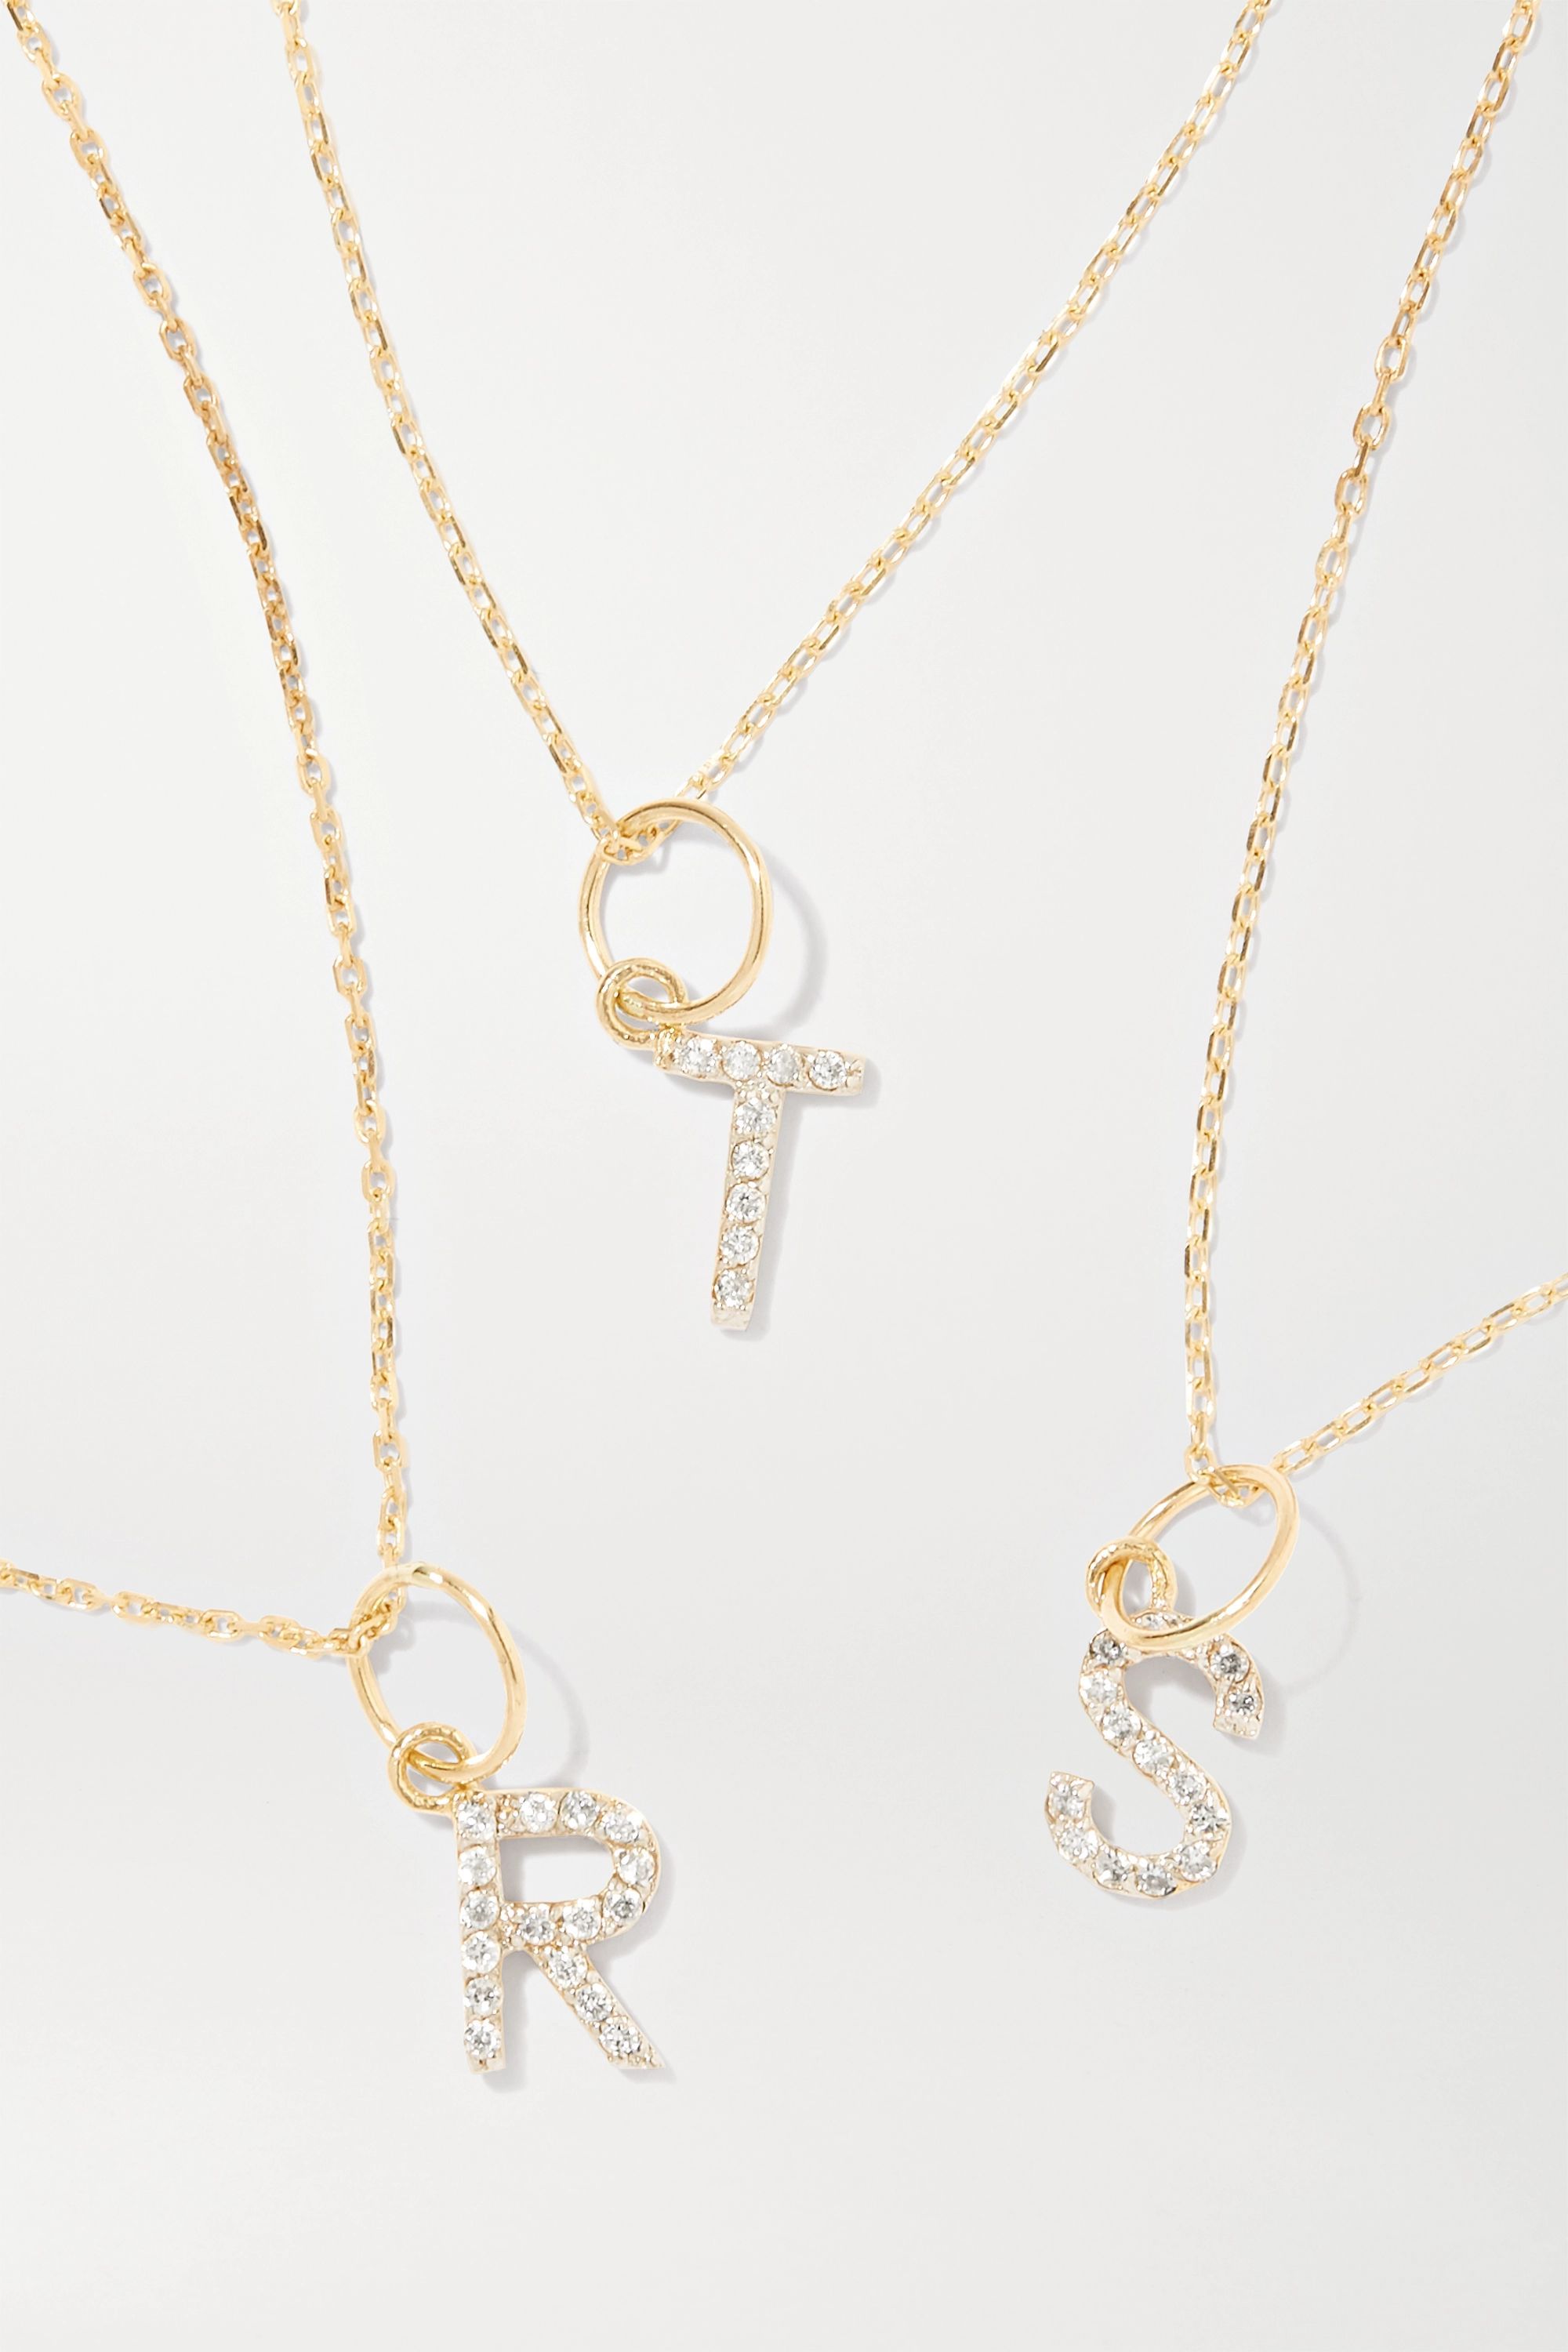 Initial gold and diamond necklace